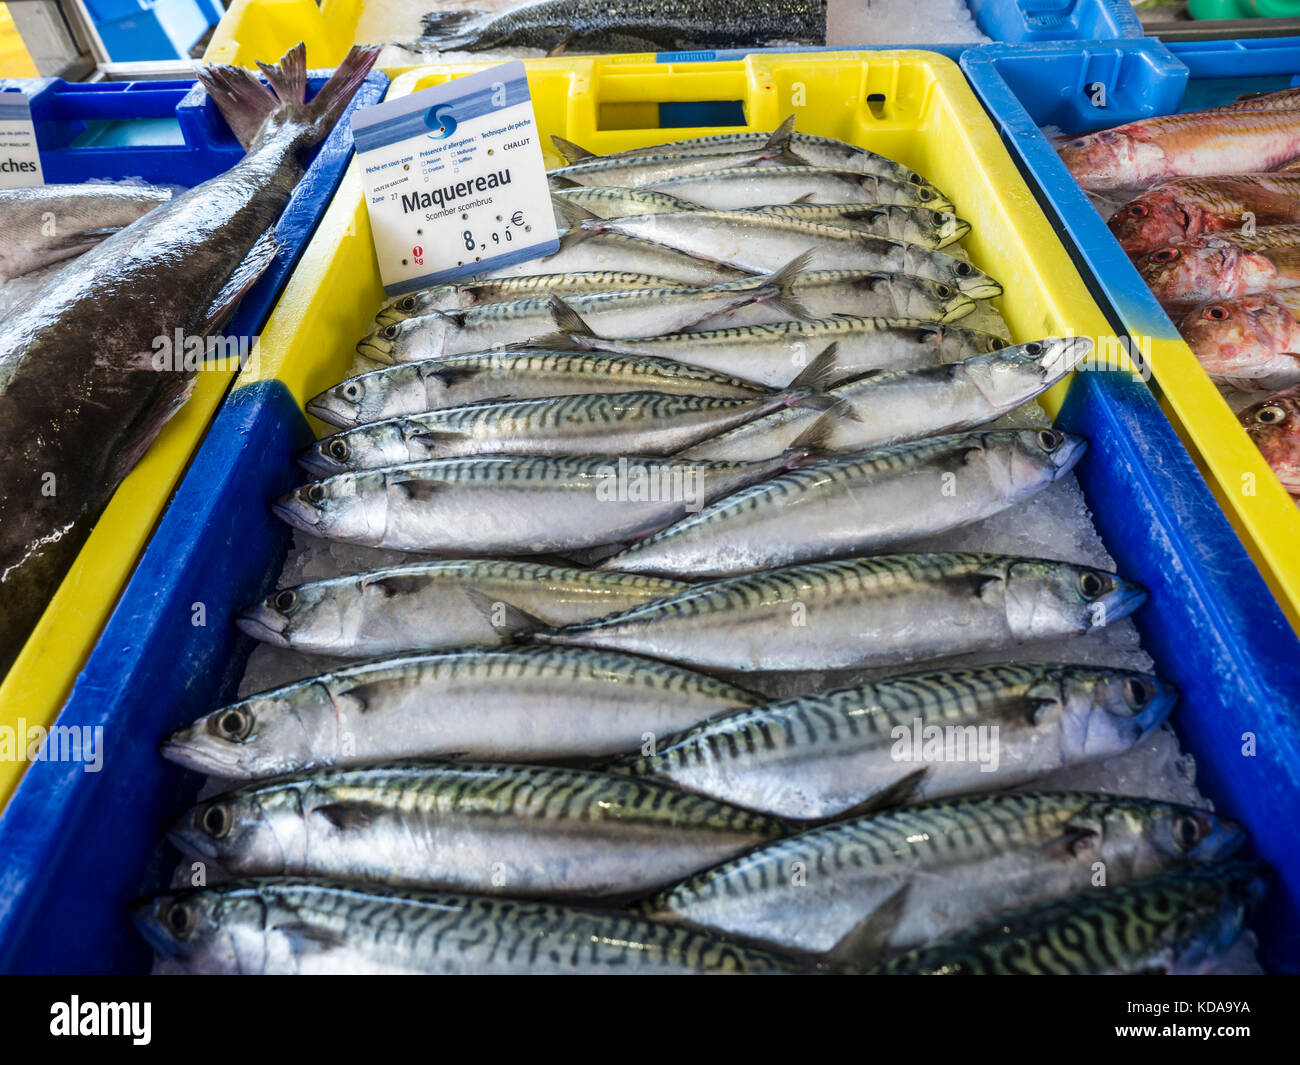 FRENCH MACKEREL FISHING INDUSTRY FRANCE Mackerel fish display neatly interleaved for sale at Breton fish market stall in Moëlan sur Mer Brittany France Stock Photo